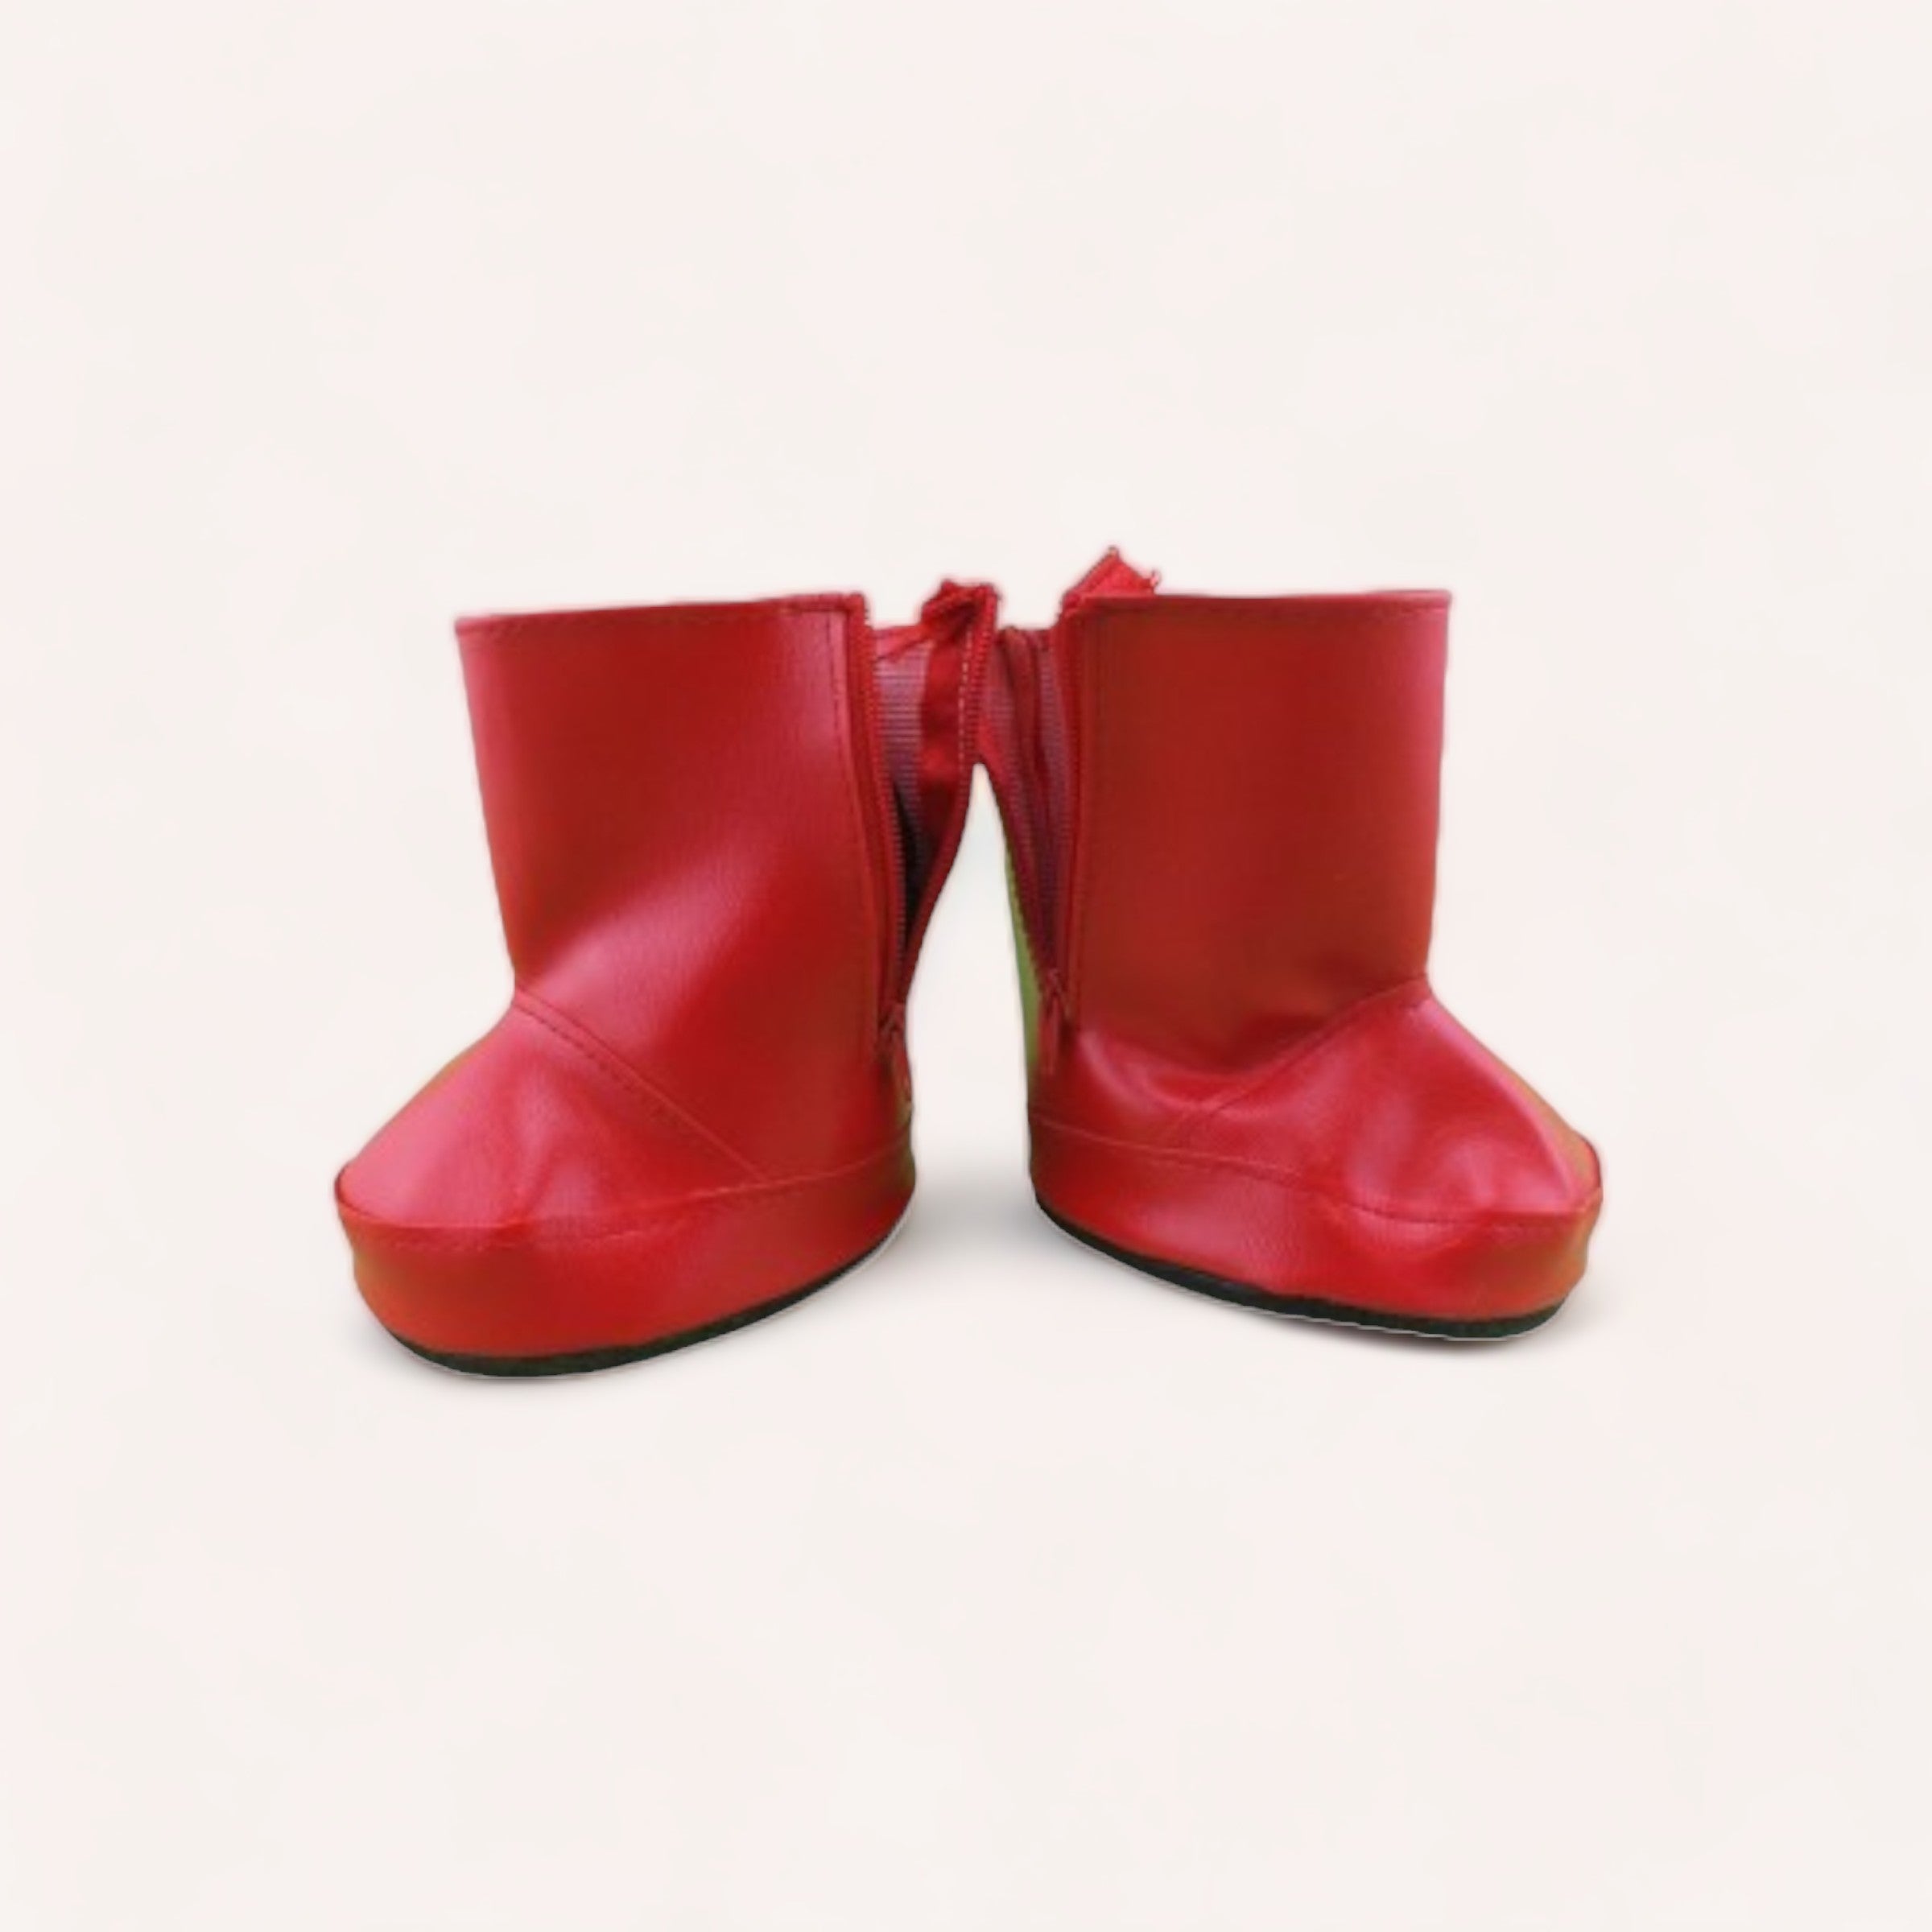 A pair of Bear Red Boots from The Teddy Factory, featuring a zip-up design and a bow at the back, presented against a clean white background.